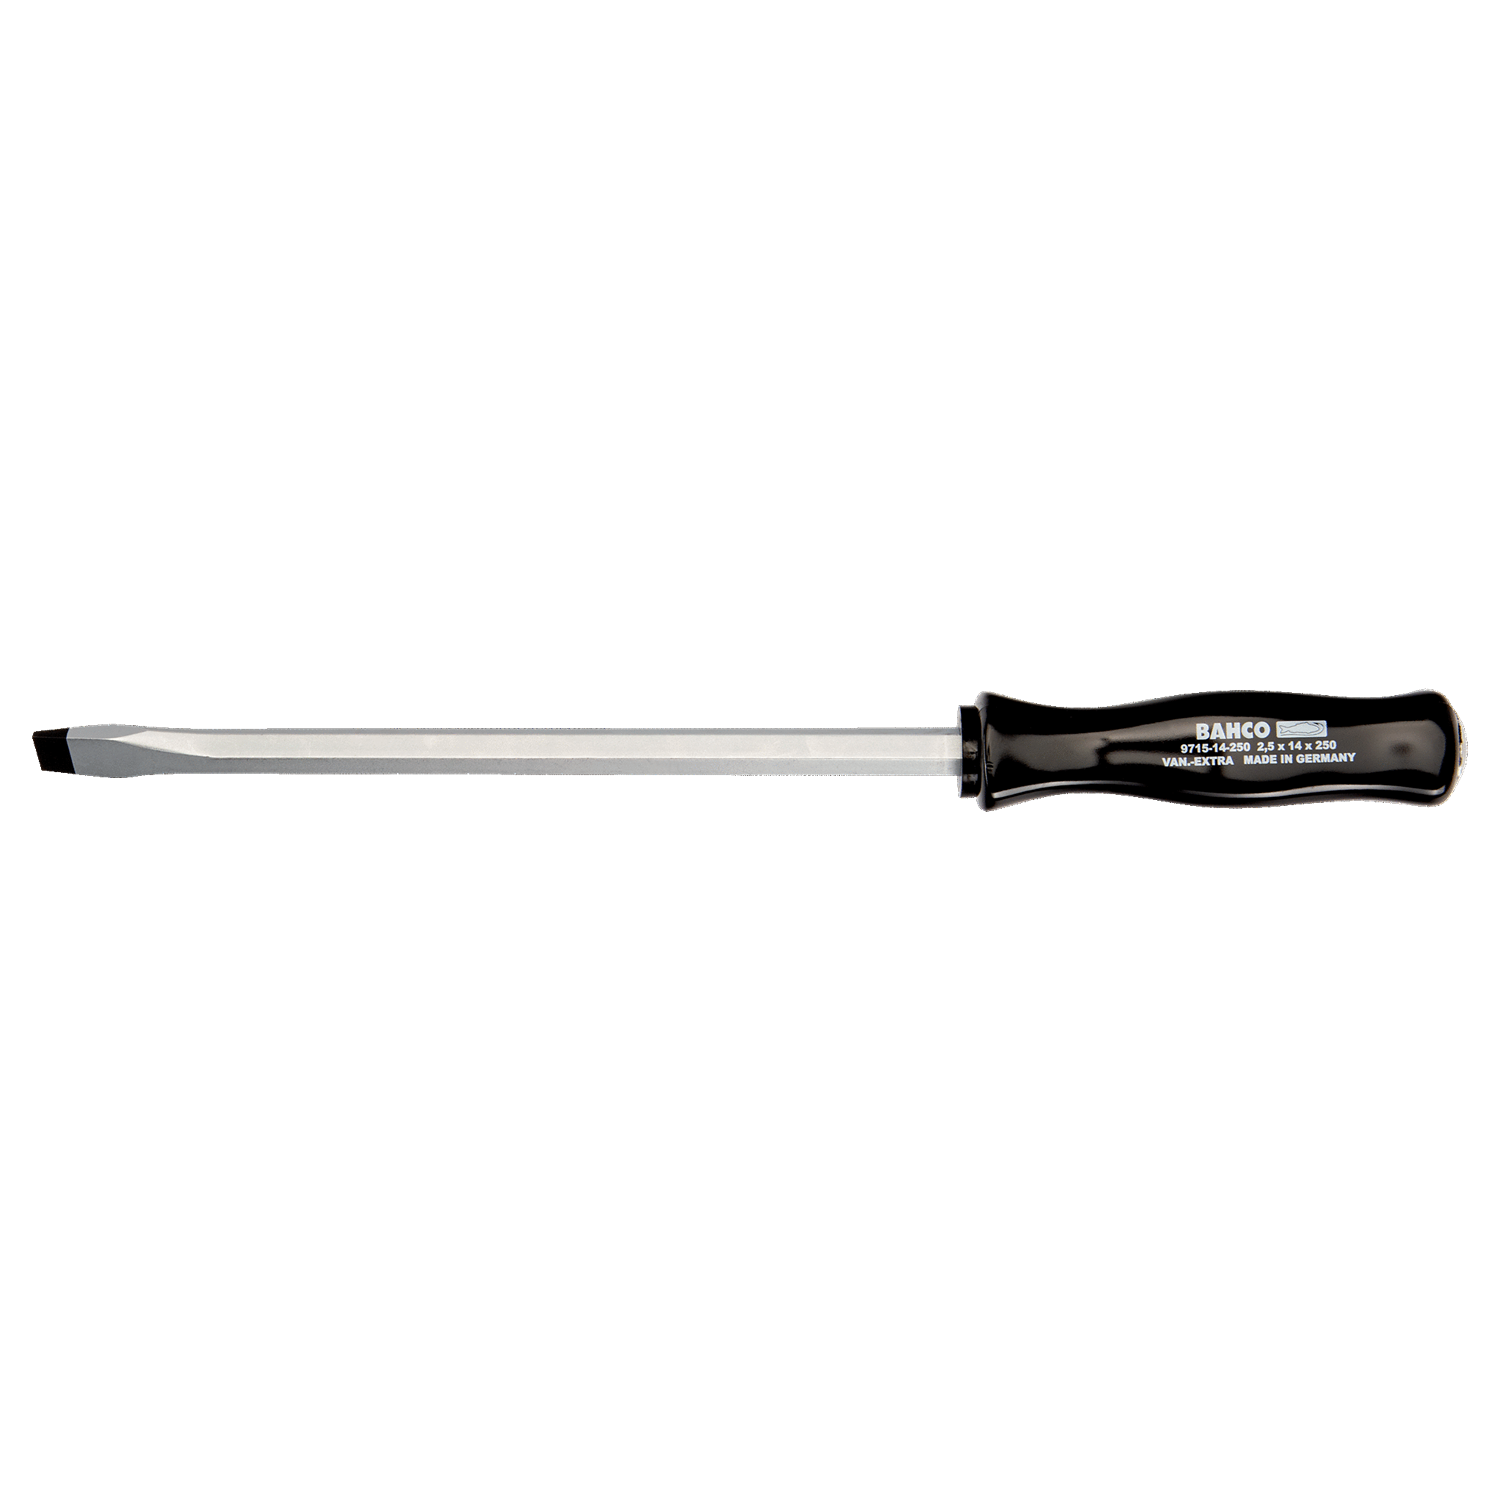 BAHCO 9715 Slotted Straight Tipped Screwdriver with Impact Grip - Premium Straight Tipped Screwdriver from BAHCO - Shop now at Yew Aik.